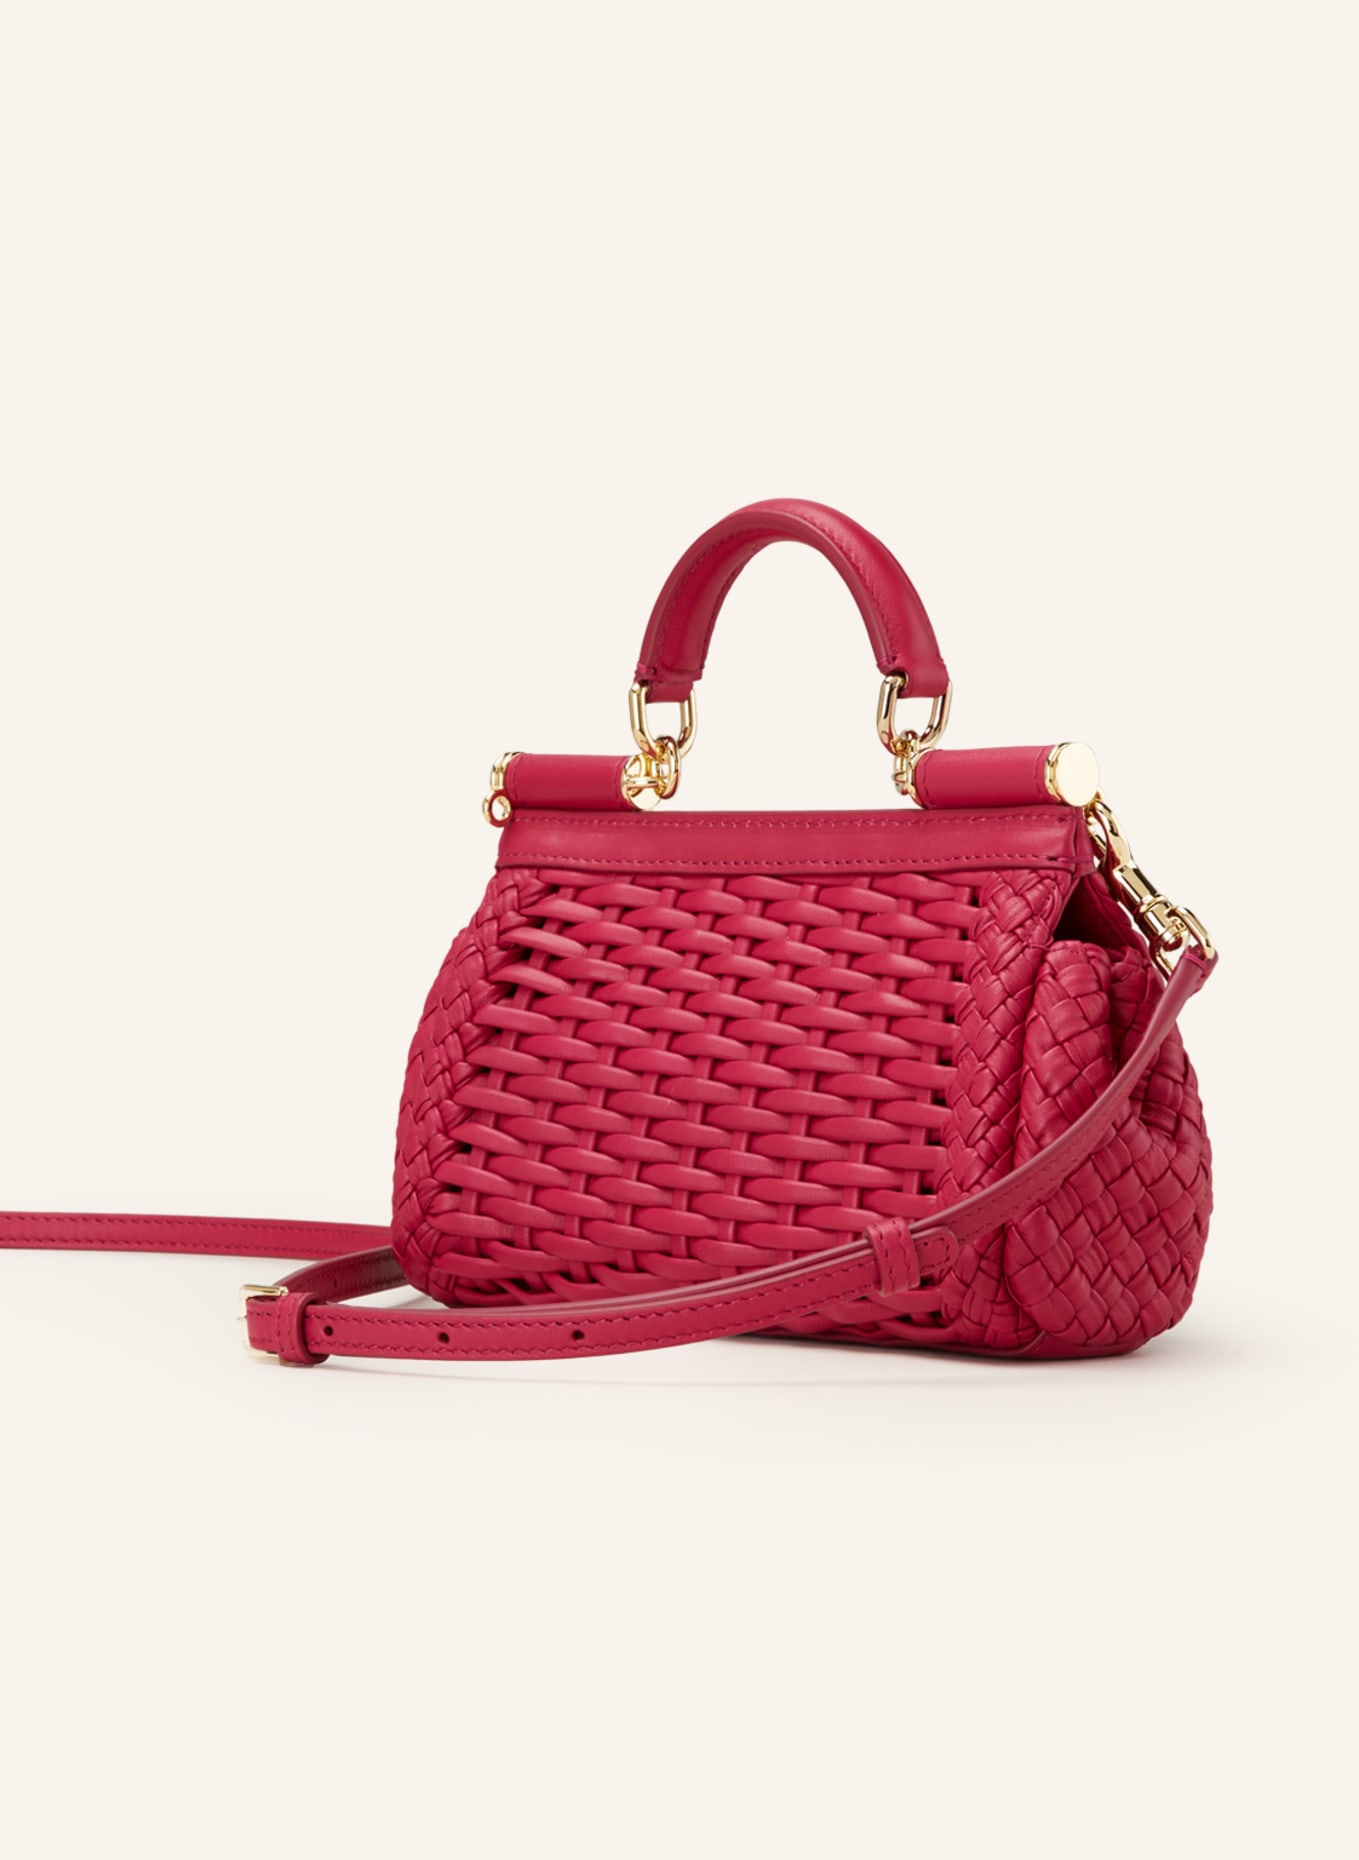 Dolce & Gabbana Fuchsia Leather Small Miss Sicily Top Handle Bag